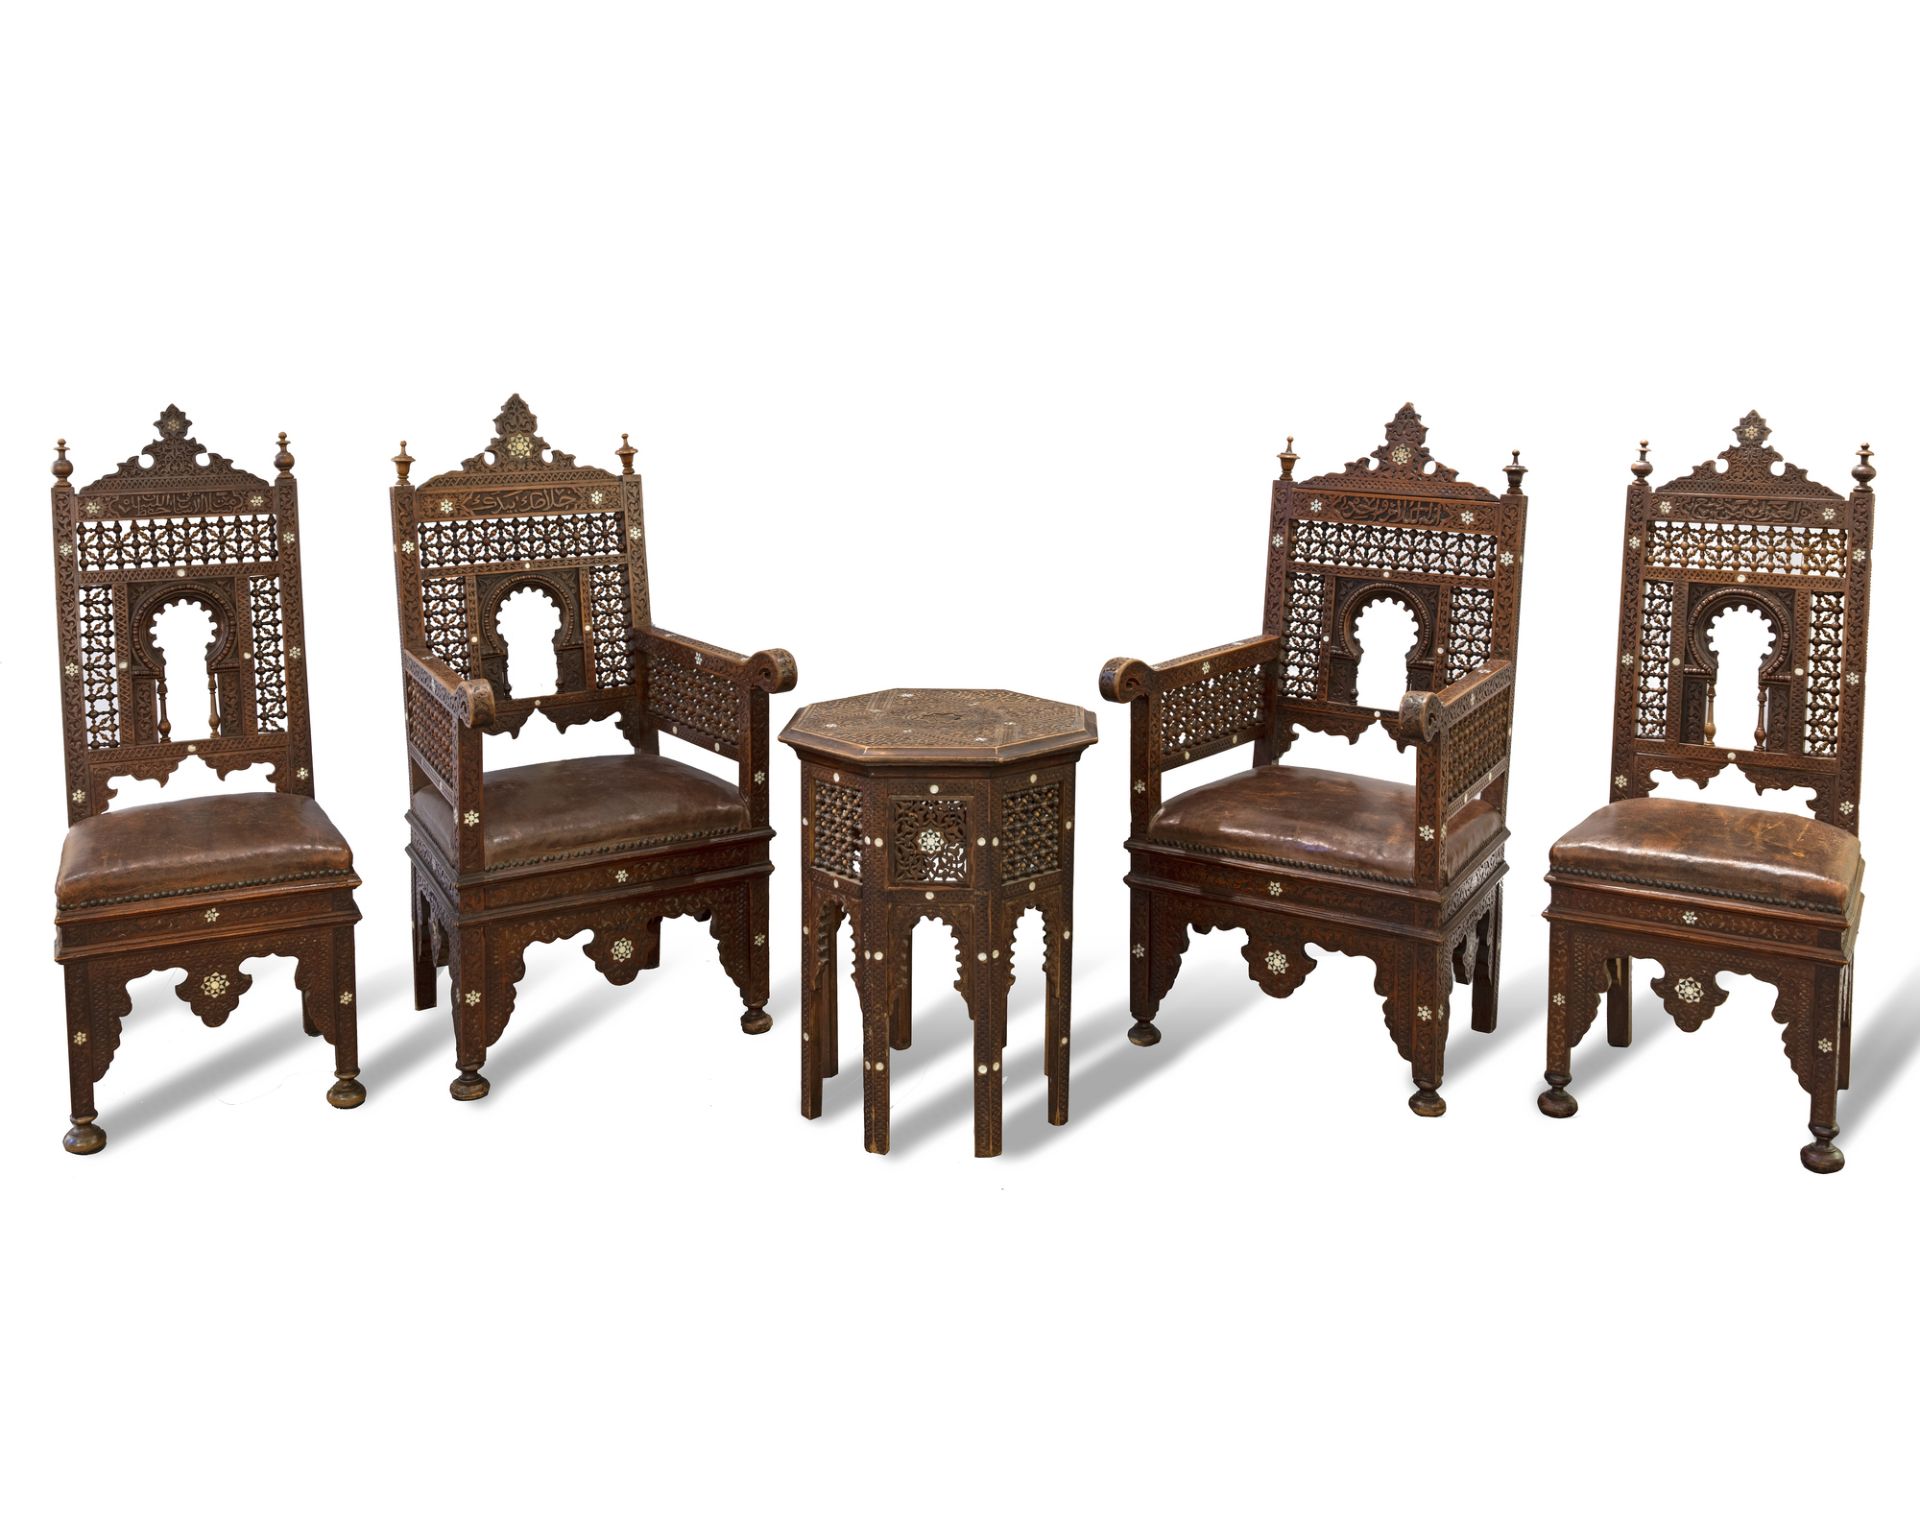 FOUR SYRIAN MOTHER-OF-PEARL INLAID WOODEN CHAIRS AND TABLE SYRIA-DAMASCUS, LATE 19TH CENTURY - Bild 2 aus 6